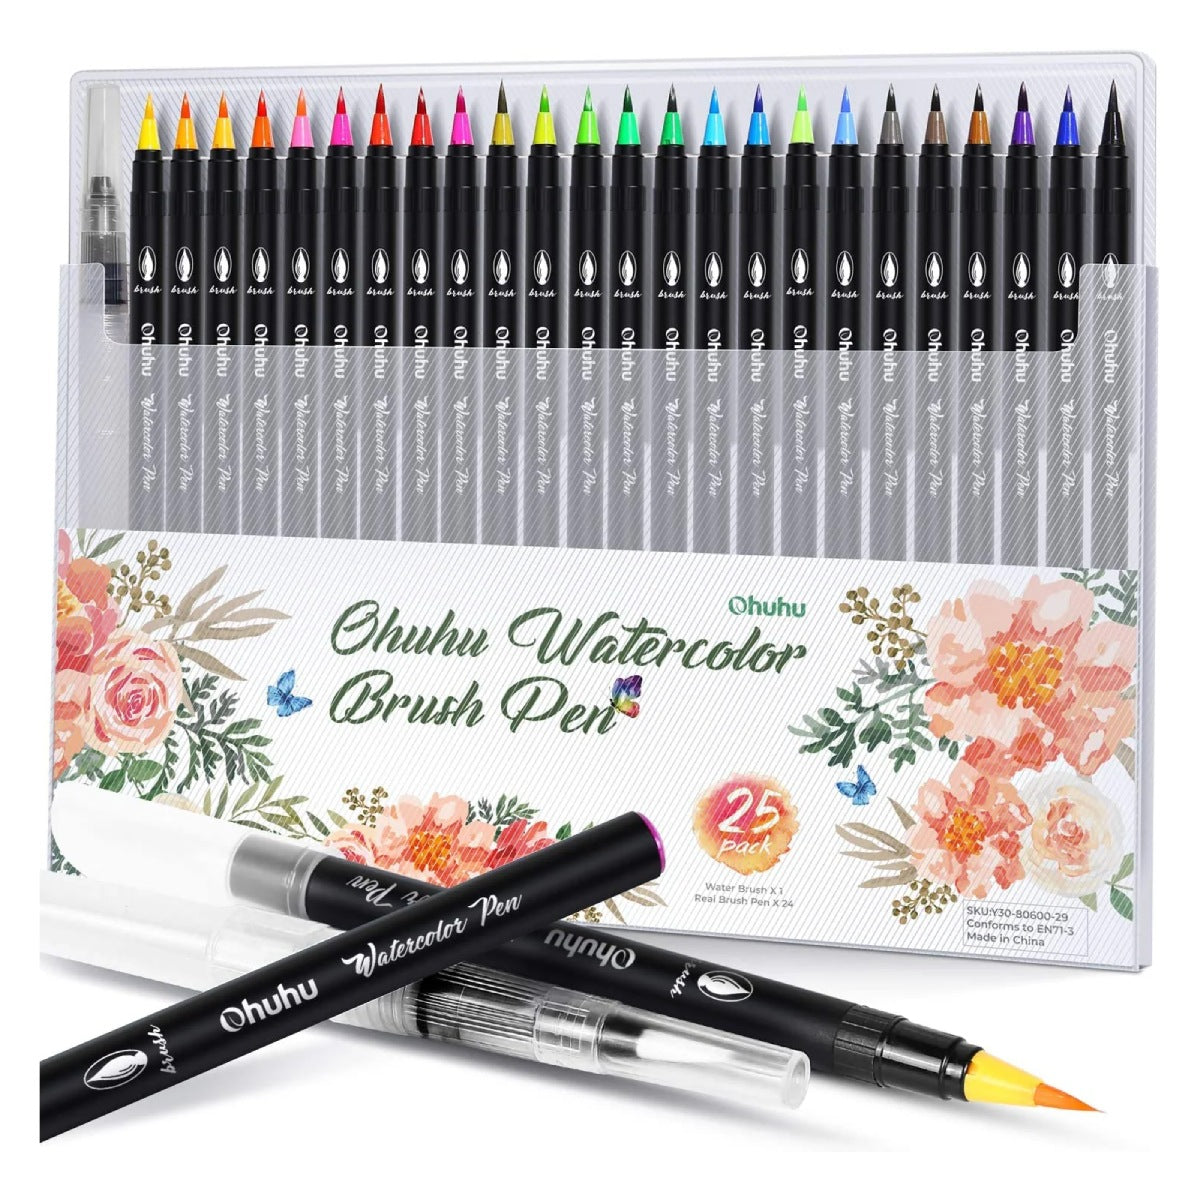 Copic Markers 24 Colors Sketch Set - 05630023 - Mogahwi Stationery